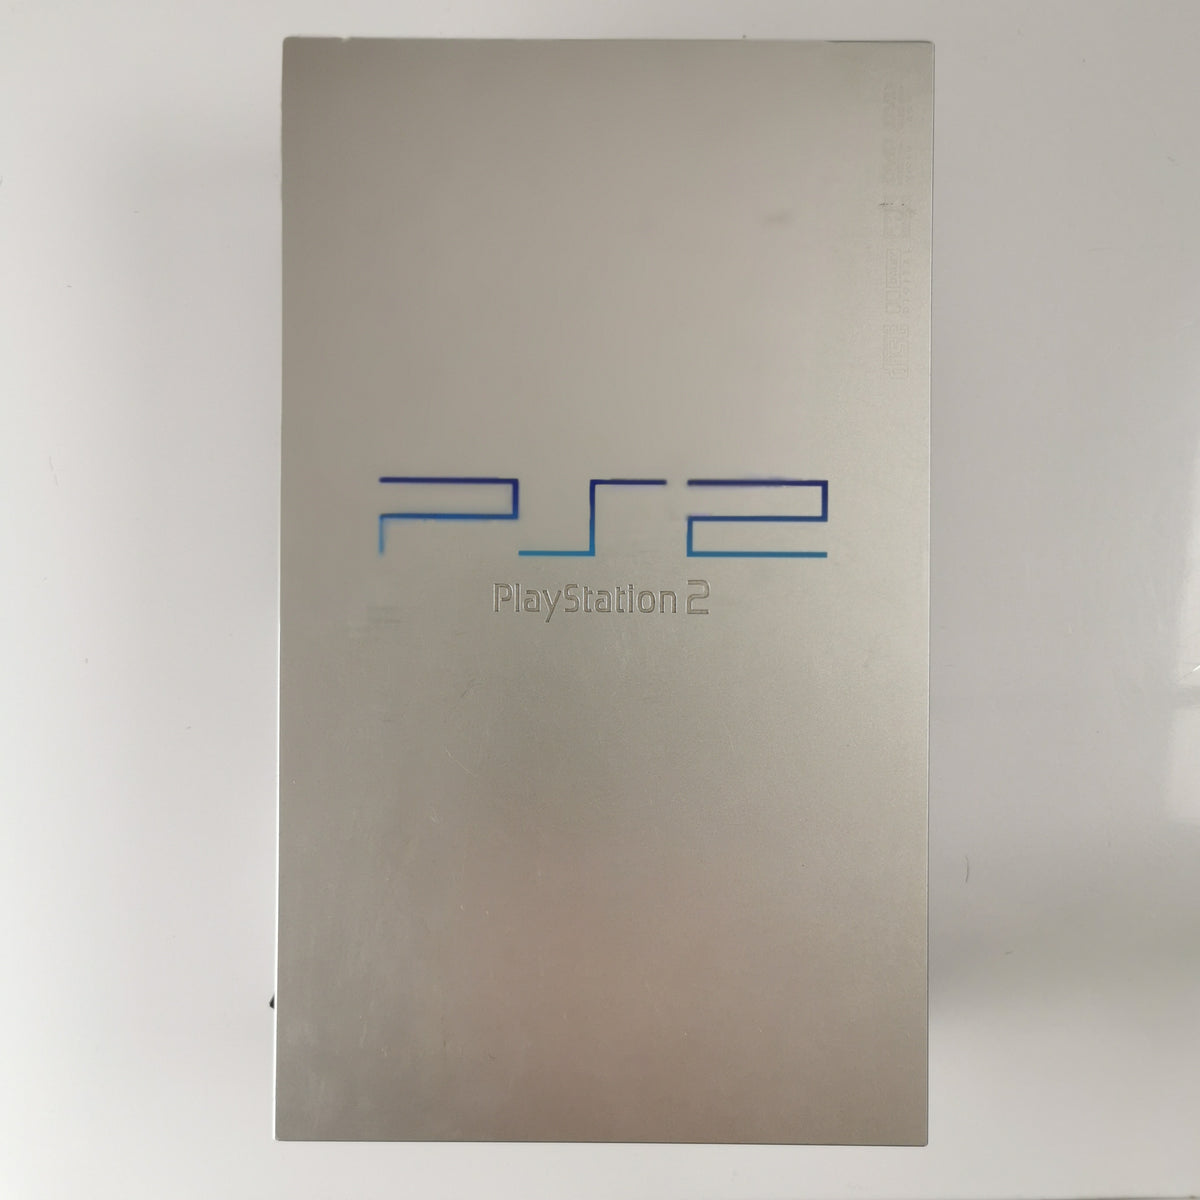 Playstation 2 PS2 Konsole silber [PS2]